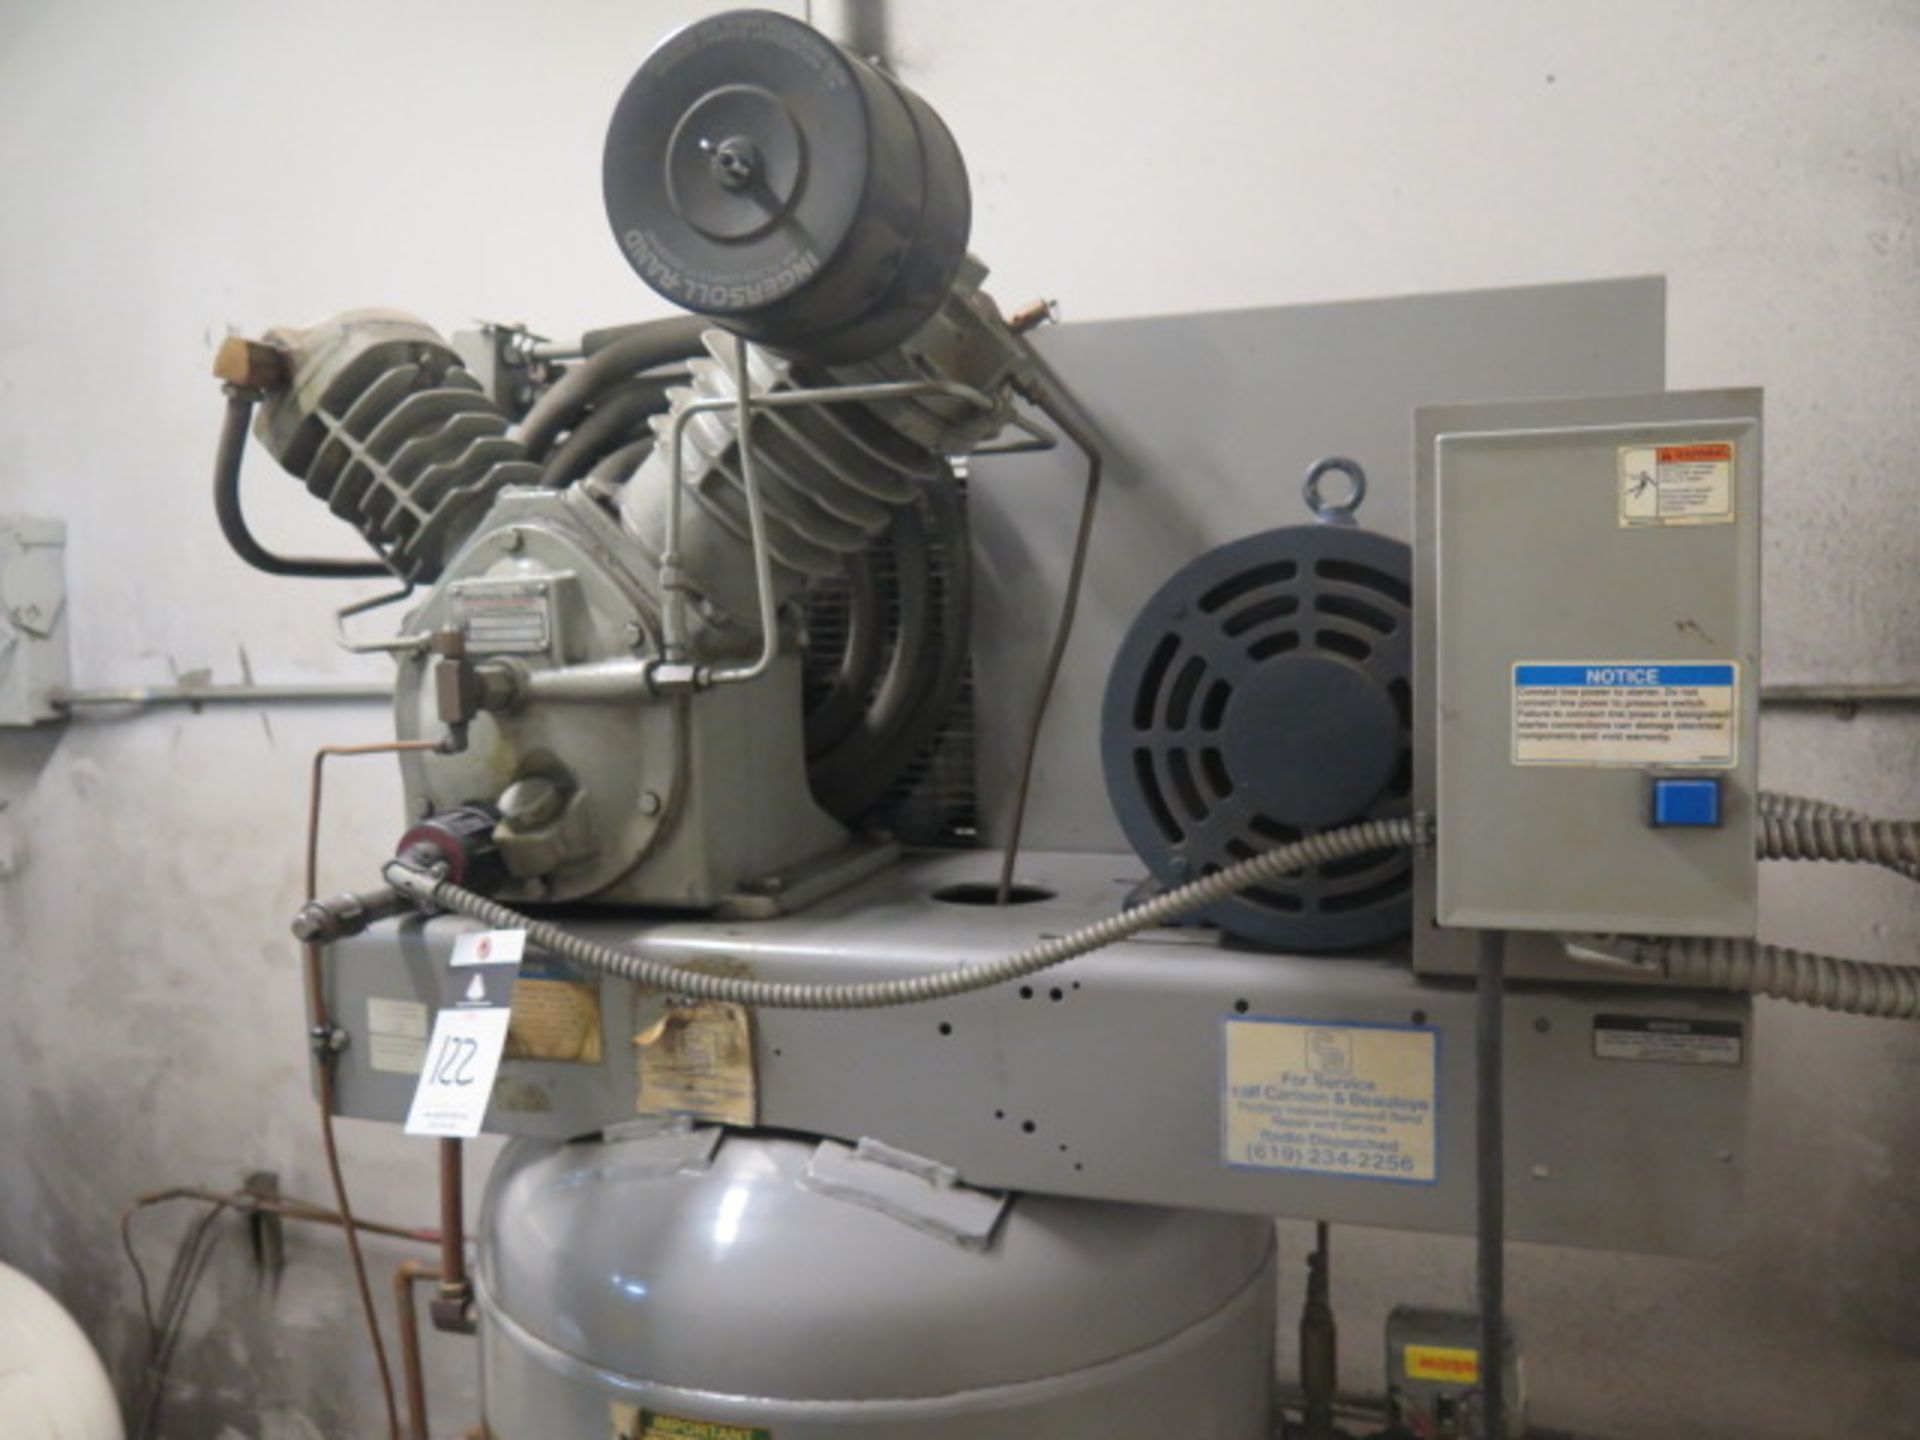 Ingersoll Rand T30 10Hp Vertical Air Compressor s/n 30T-889067 w/ 2-Stage Pump, 80 Gallon Tank - Image 3 of 5